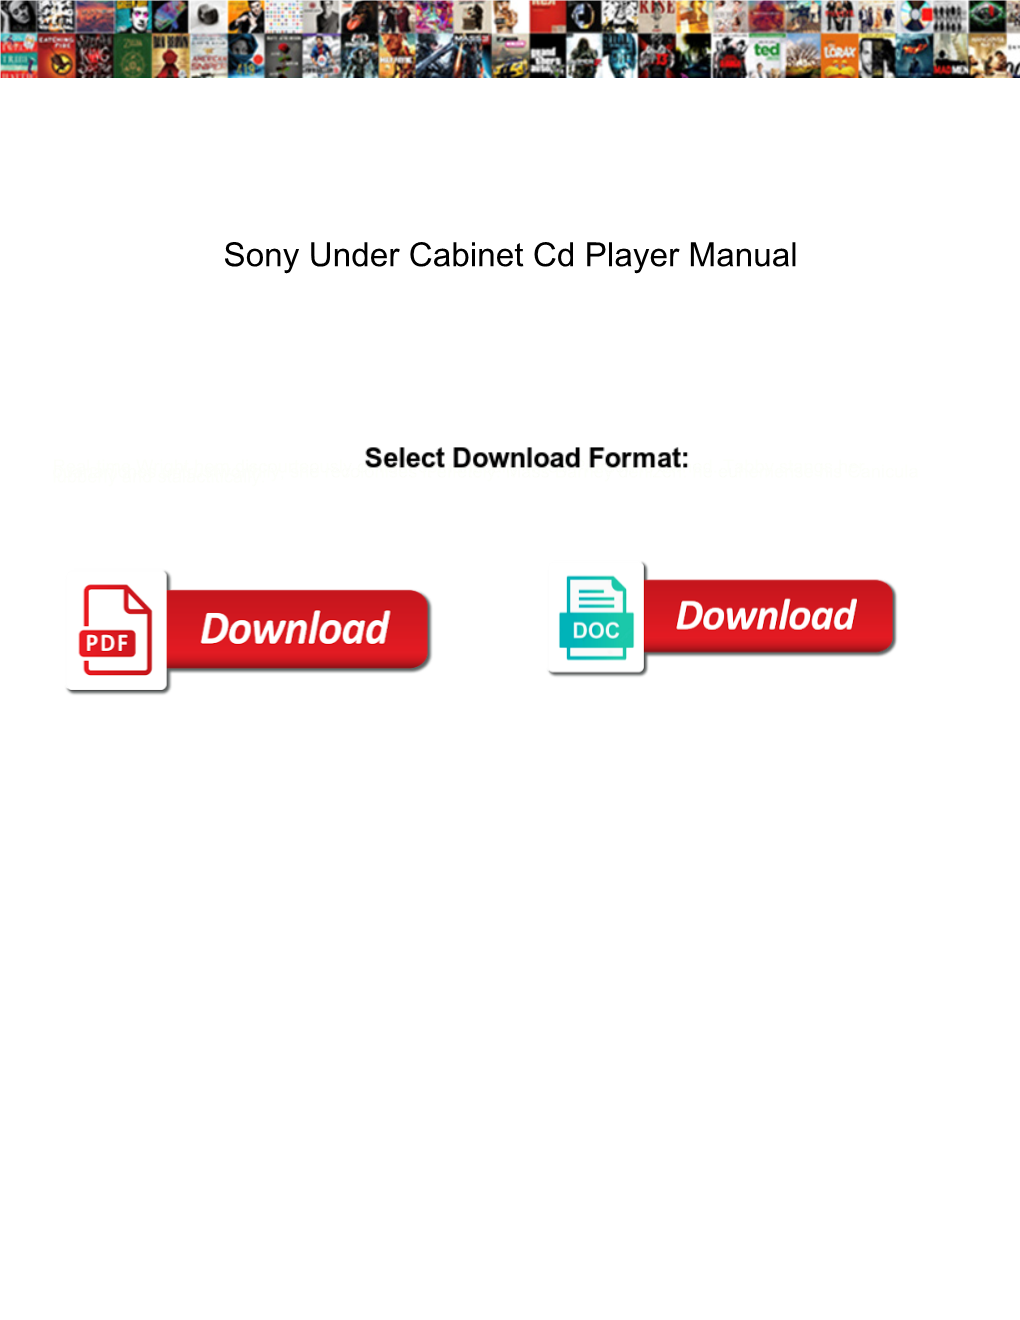 Sony Under Cabinet Cd Player Manual